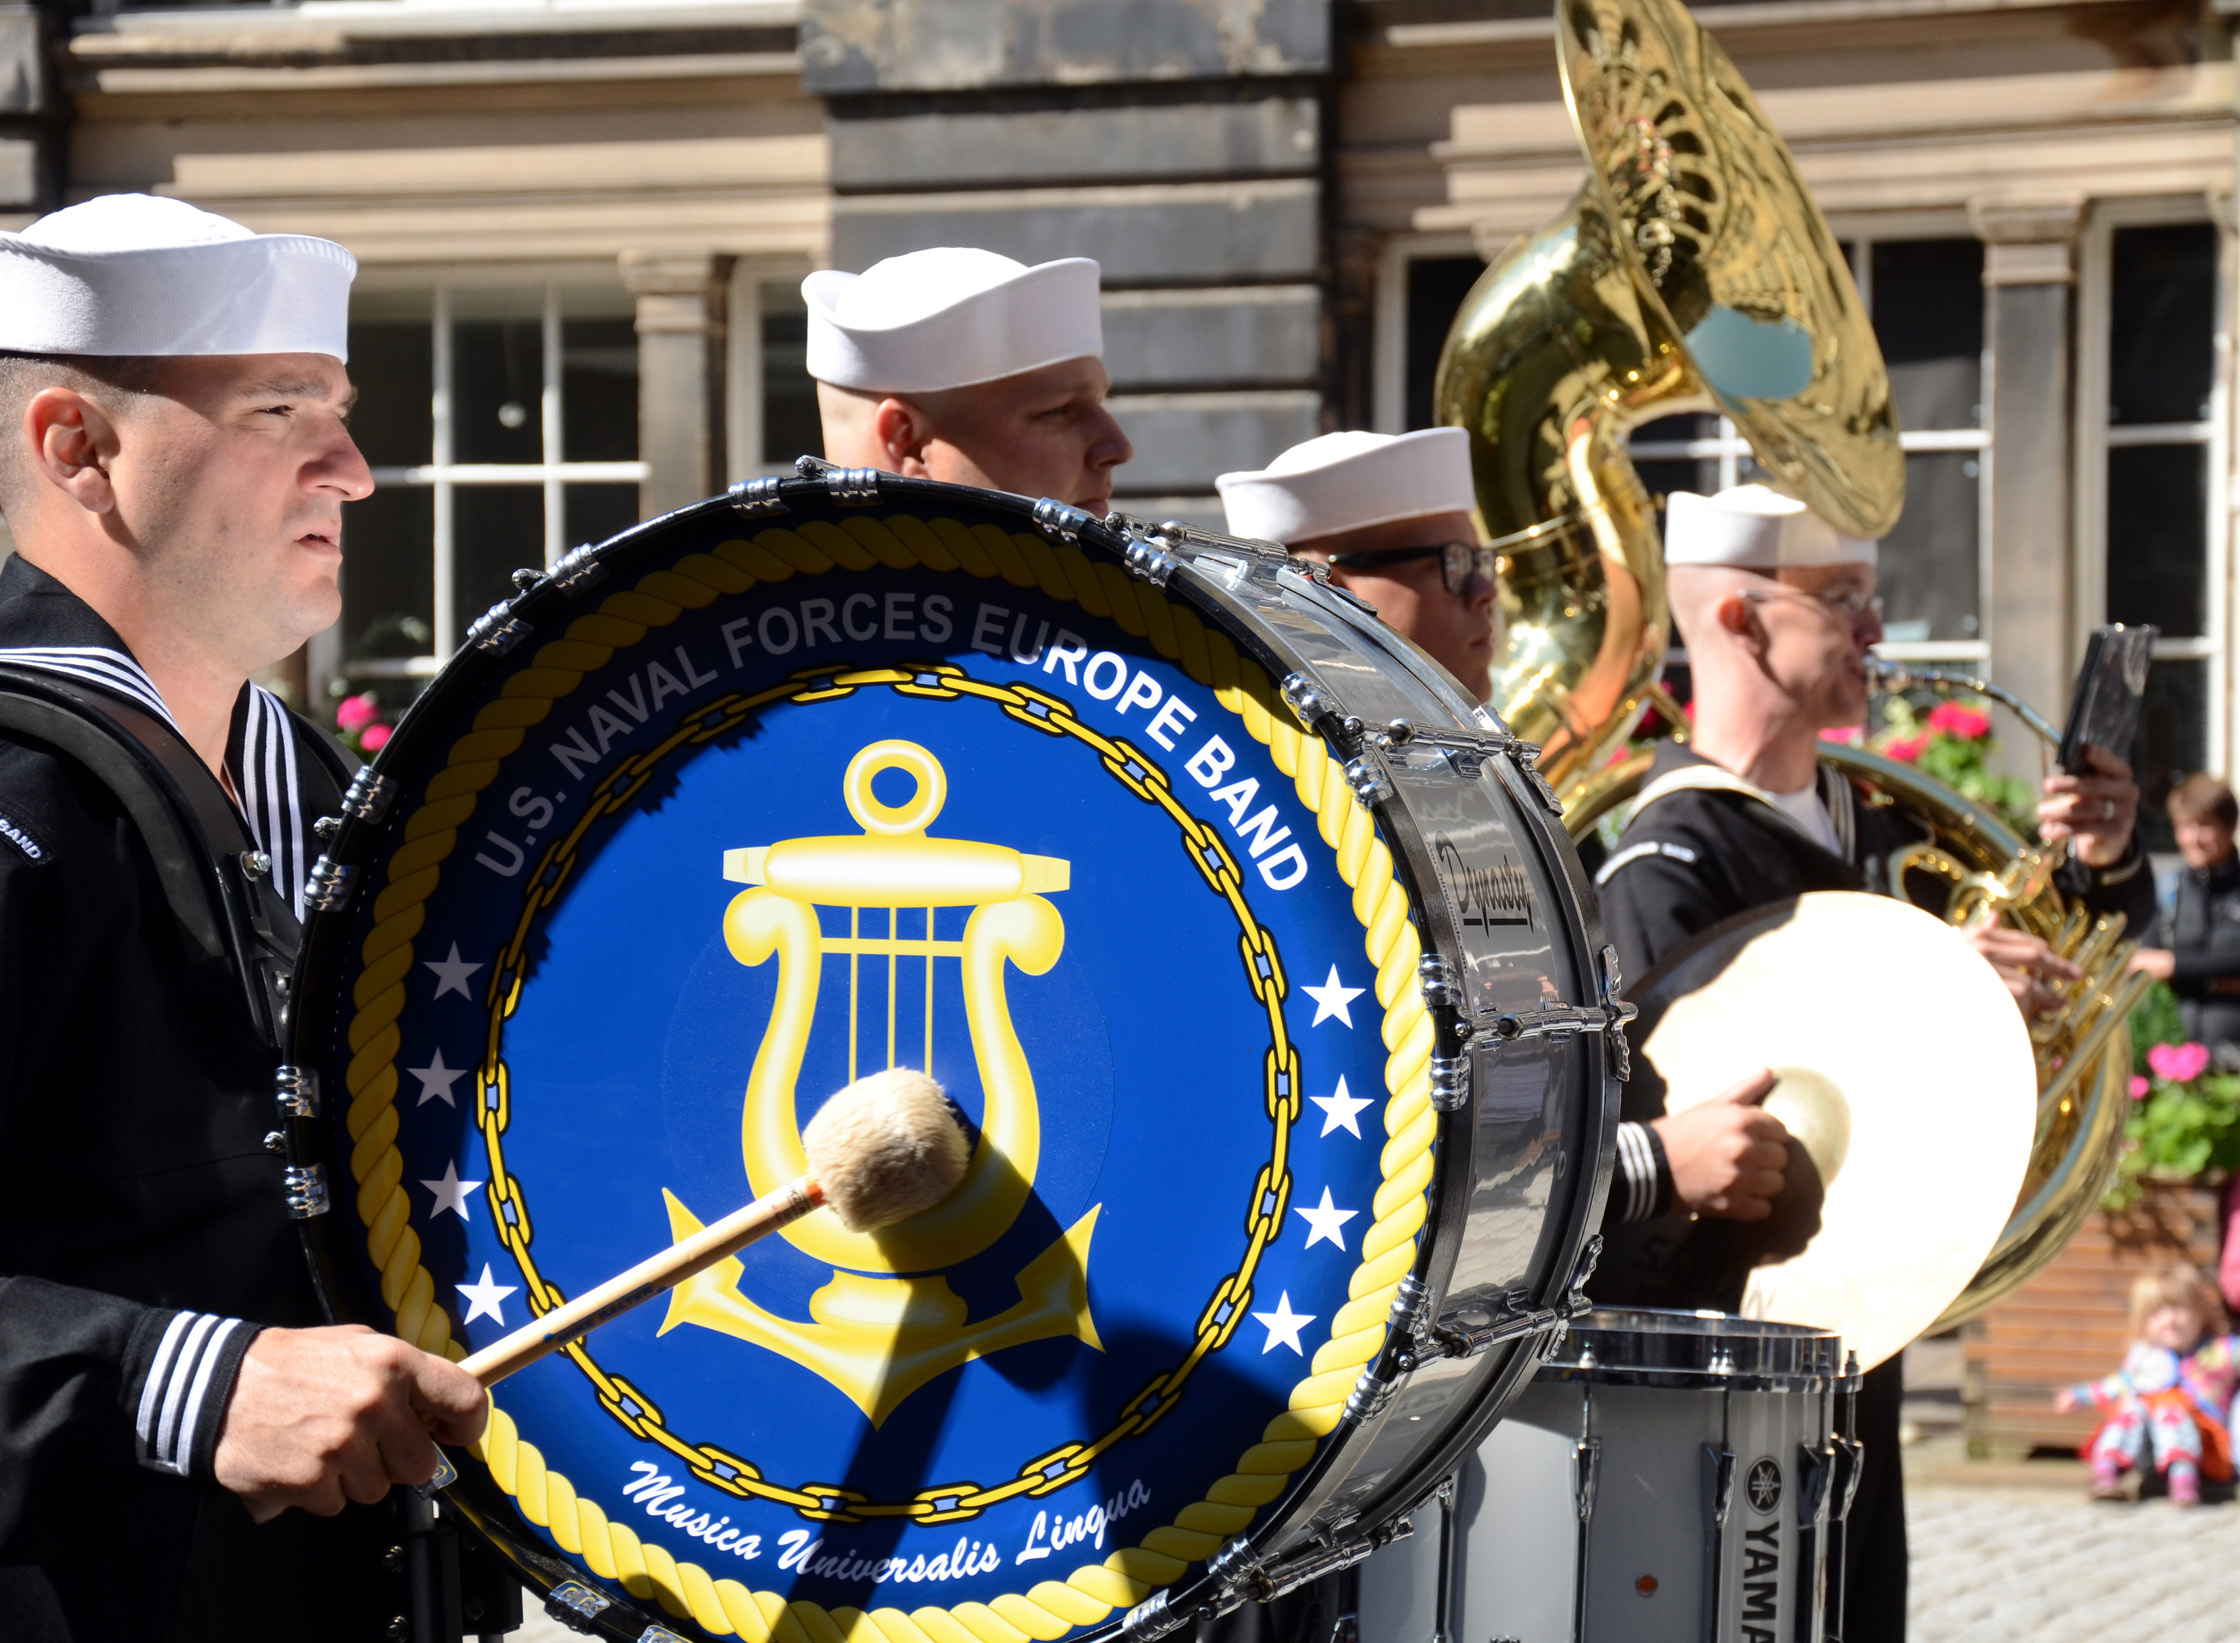 U.S. NAVAL FORCES EUROPE BAND